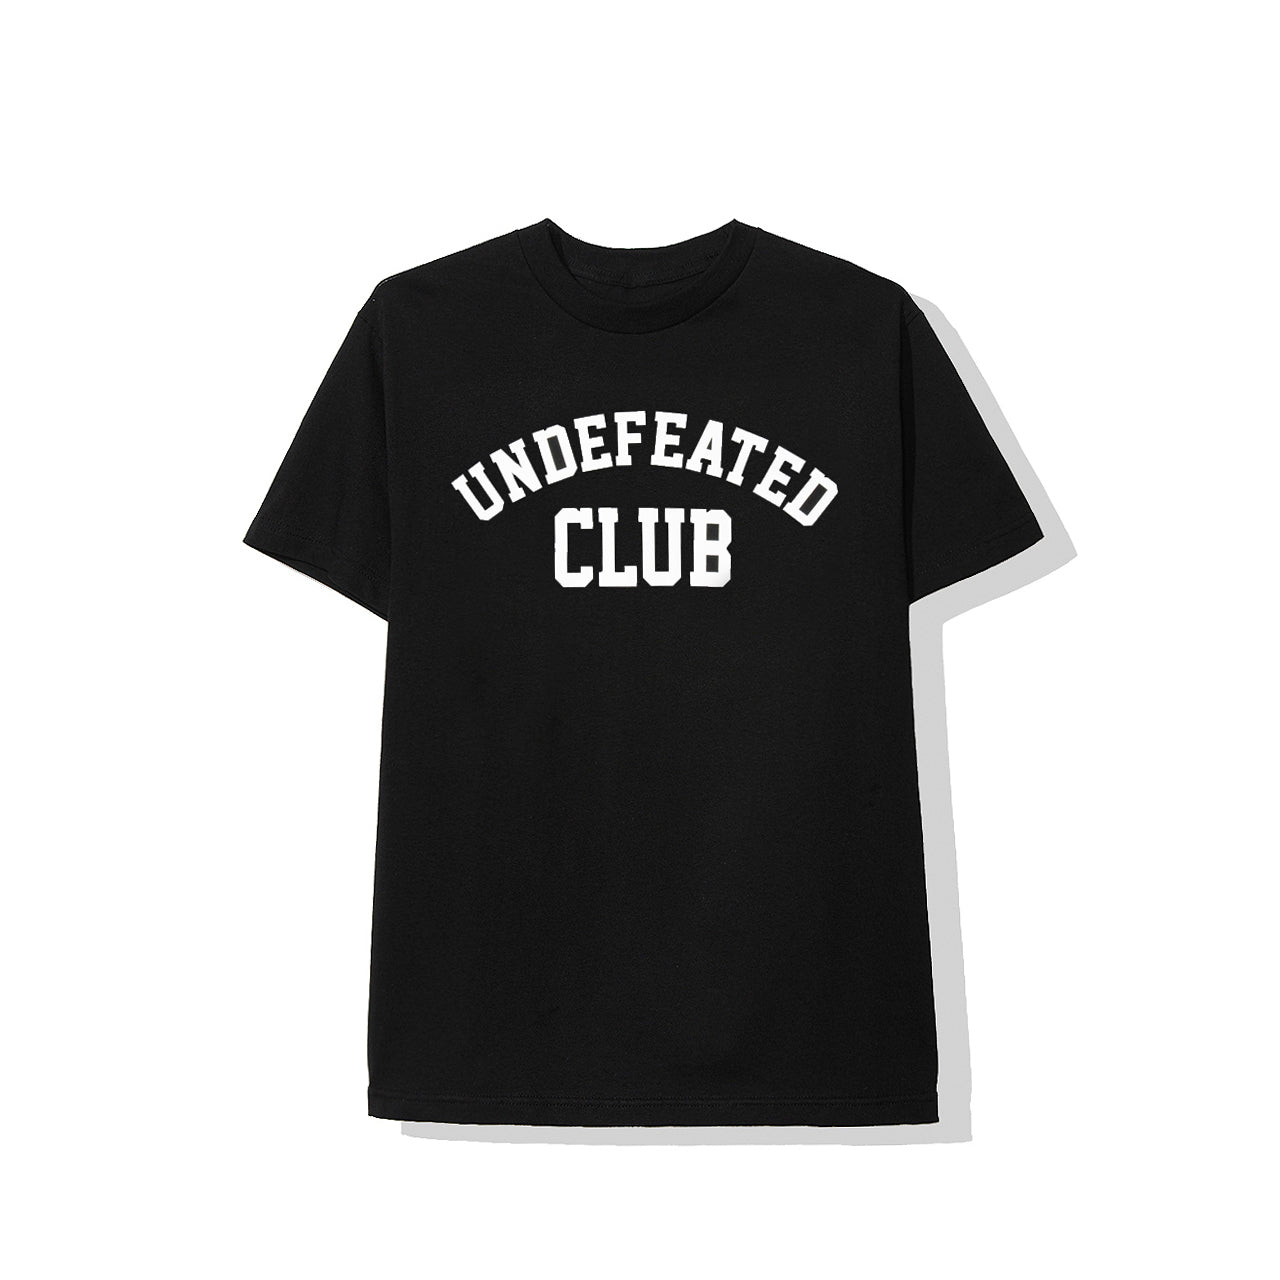 Undefeated Club | ASSC Club Black Tee